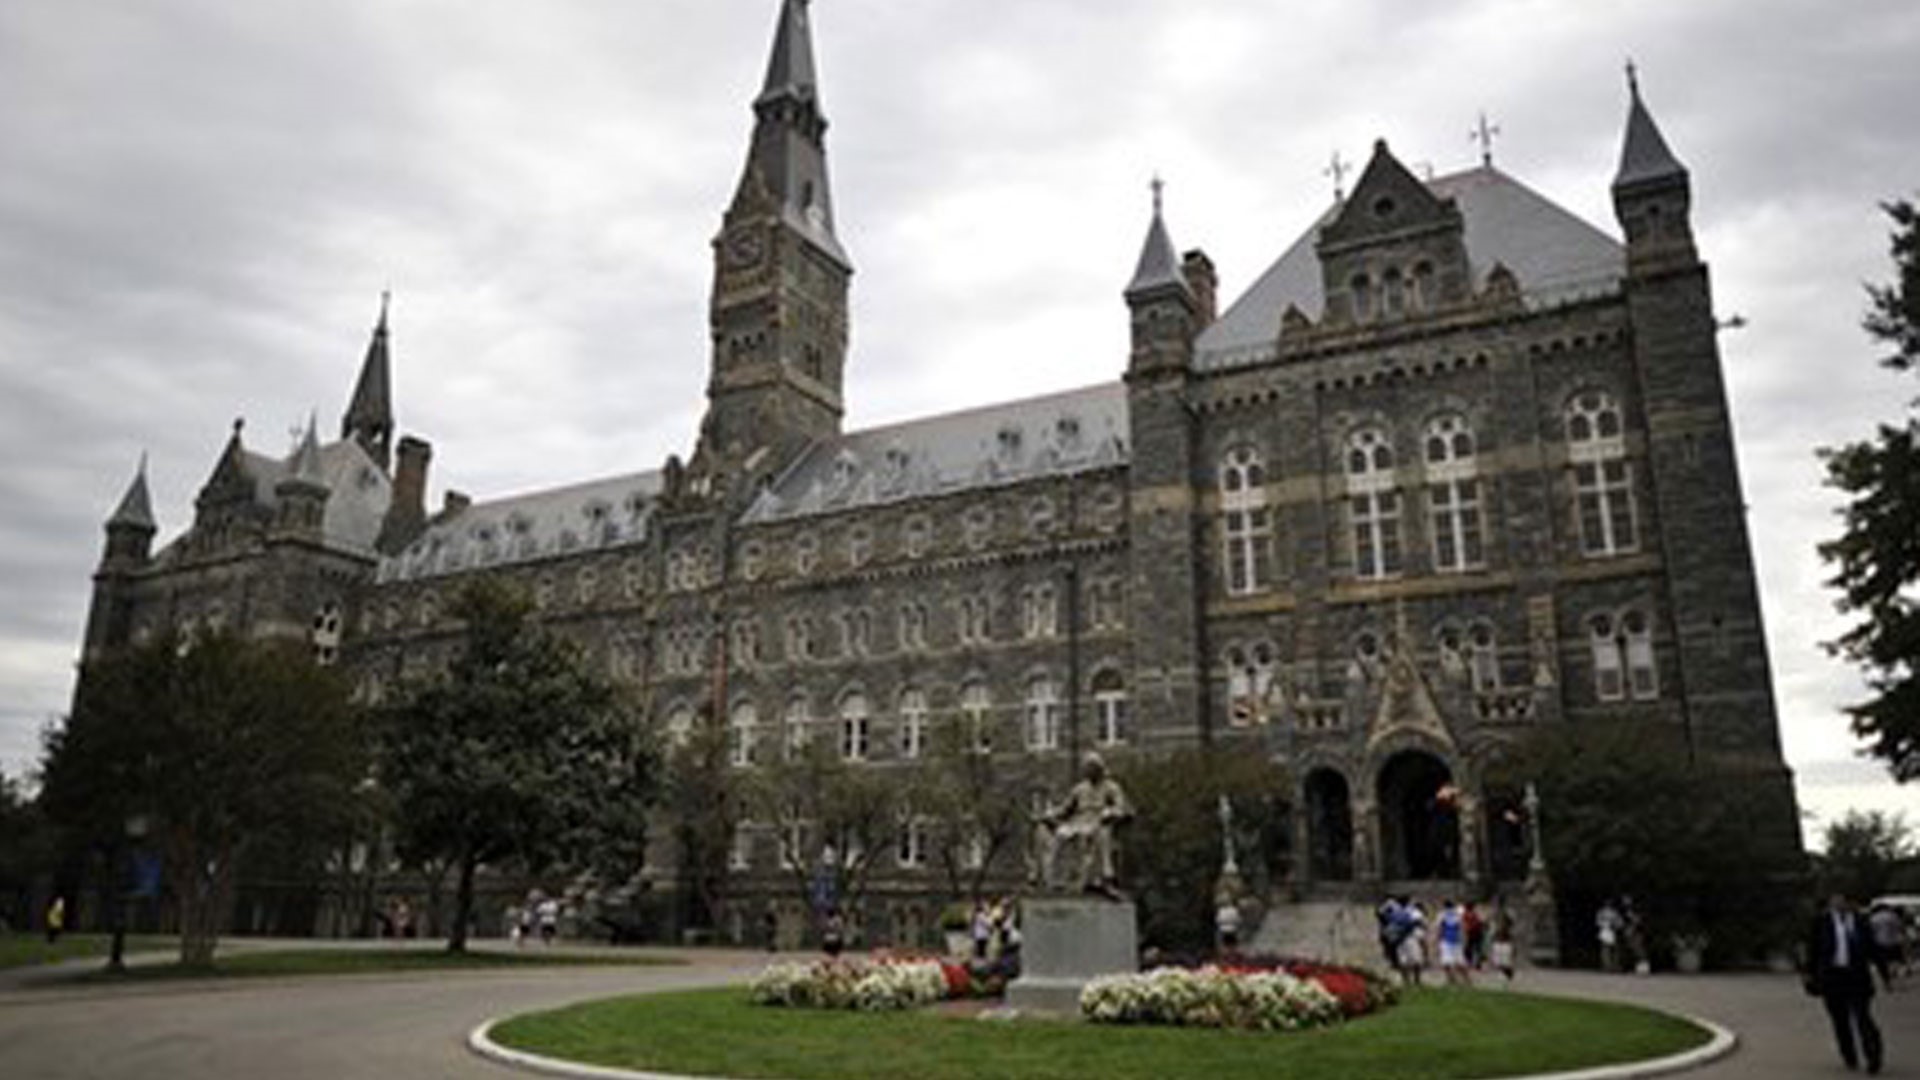 Students at Georgetown University are voting on a proposal to fund reparations for descendants of slaves once sold by the school.